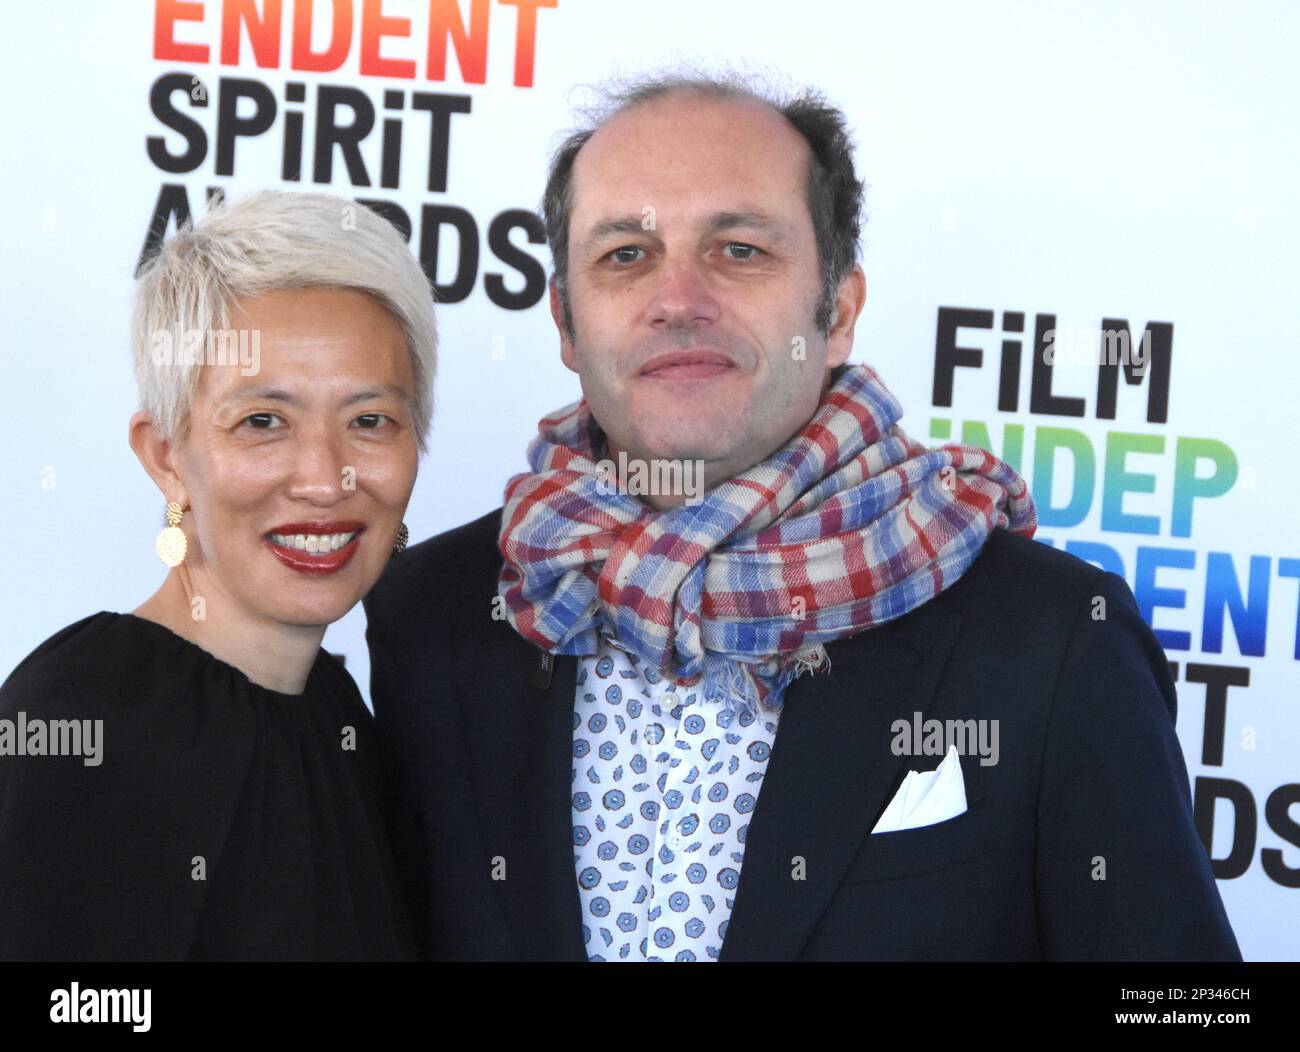 Santa Monica, California, USA 4th March 2023 Producers Theresa Park and Francesco Melzi attend the 2023 Film Independent Spirit Awards on March 4, 2023 at Santa Mlonica Beach in Santa Monica, California, USA. Photo by Barry King/Alamy Live News Stock Photo